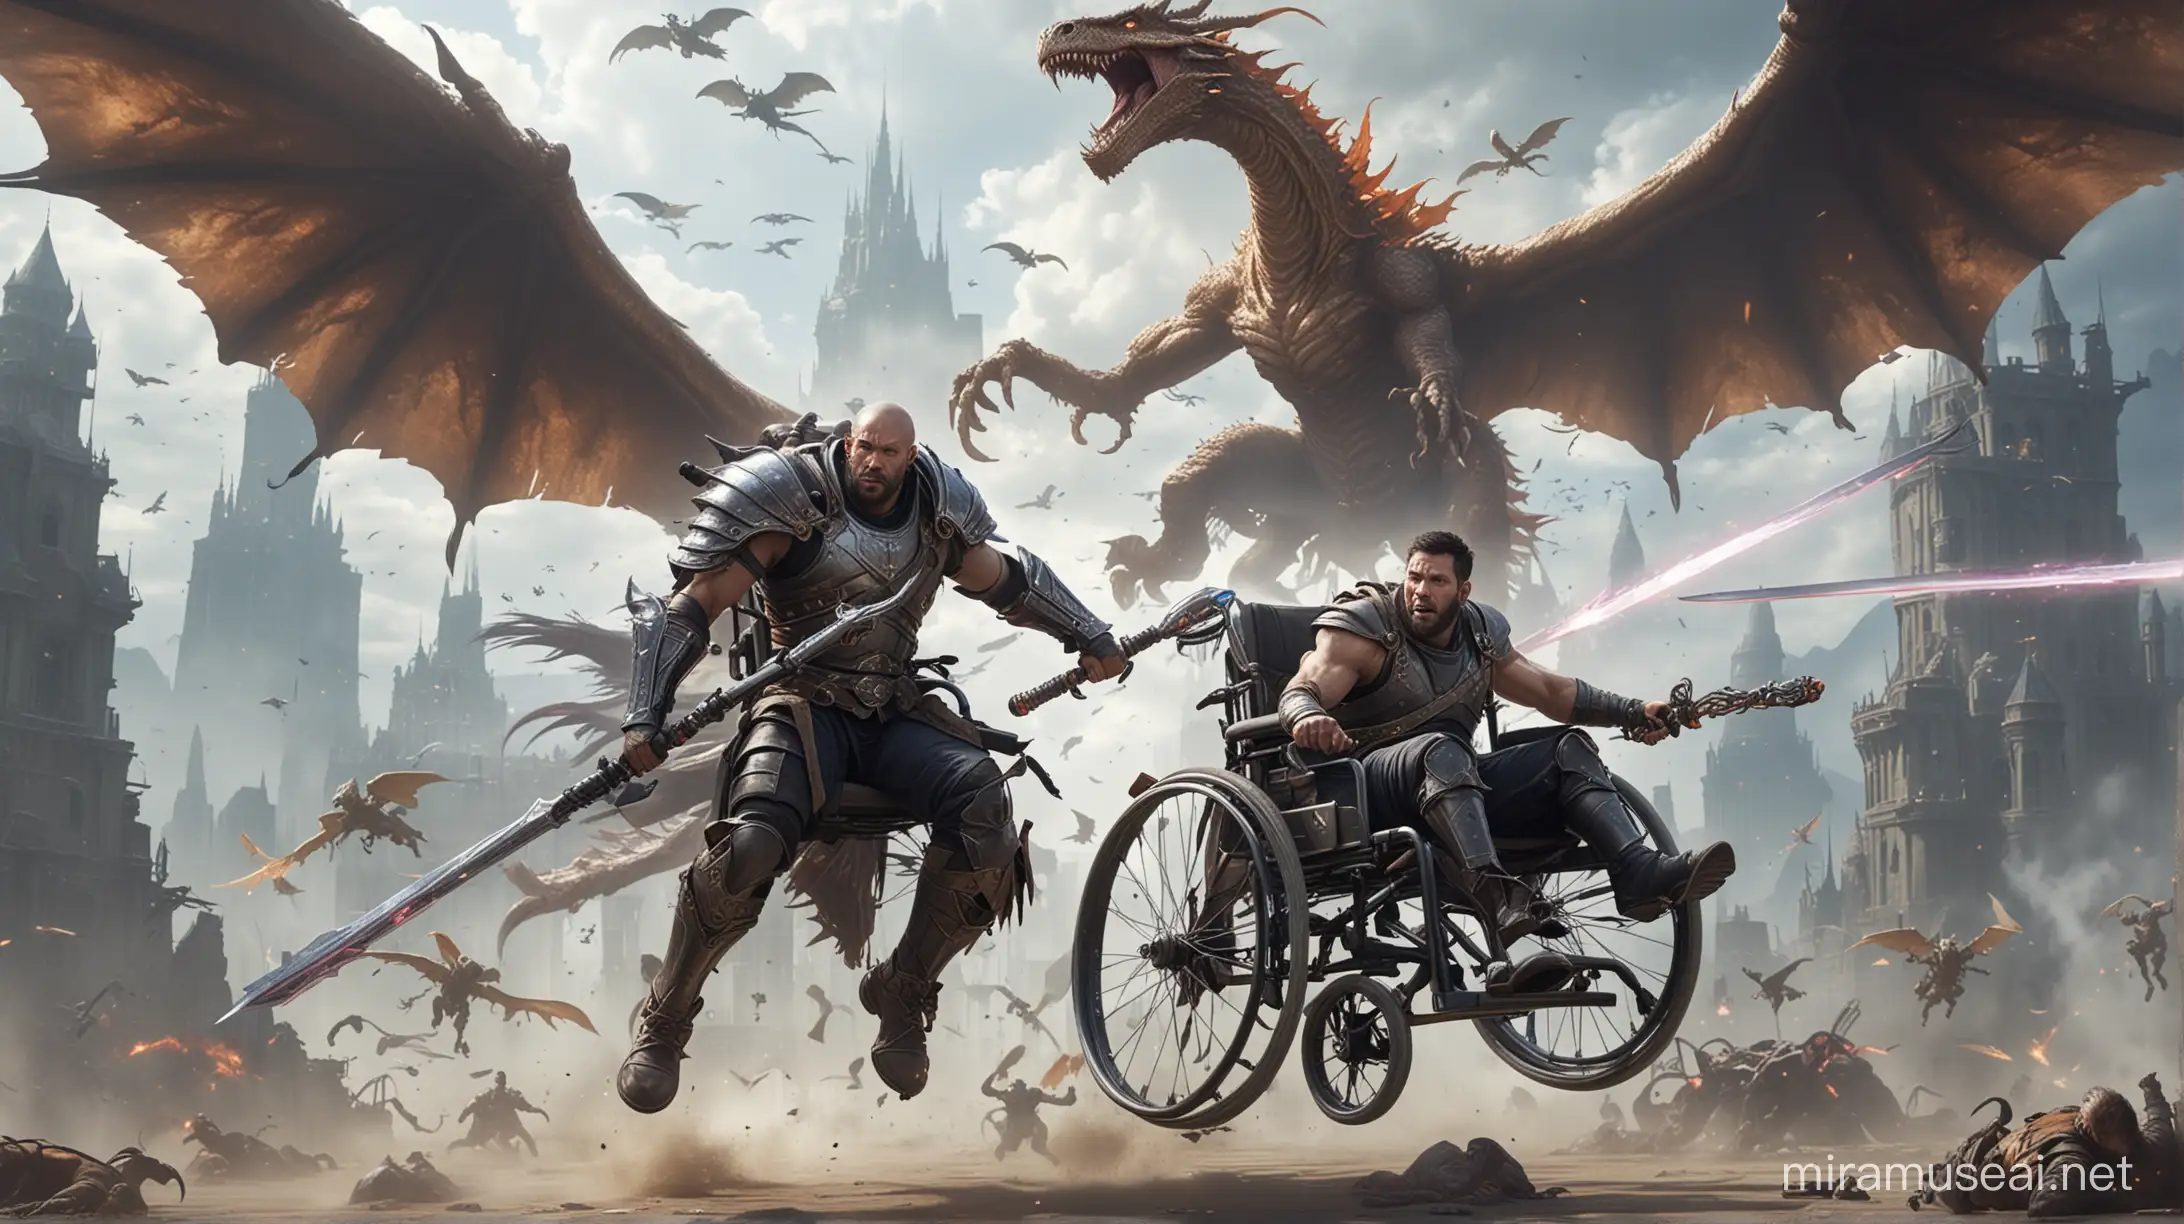 Disabled warrior with paralyzed legs stuck in a wheelchair, fighting flying monsters using a magical sword